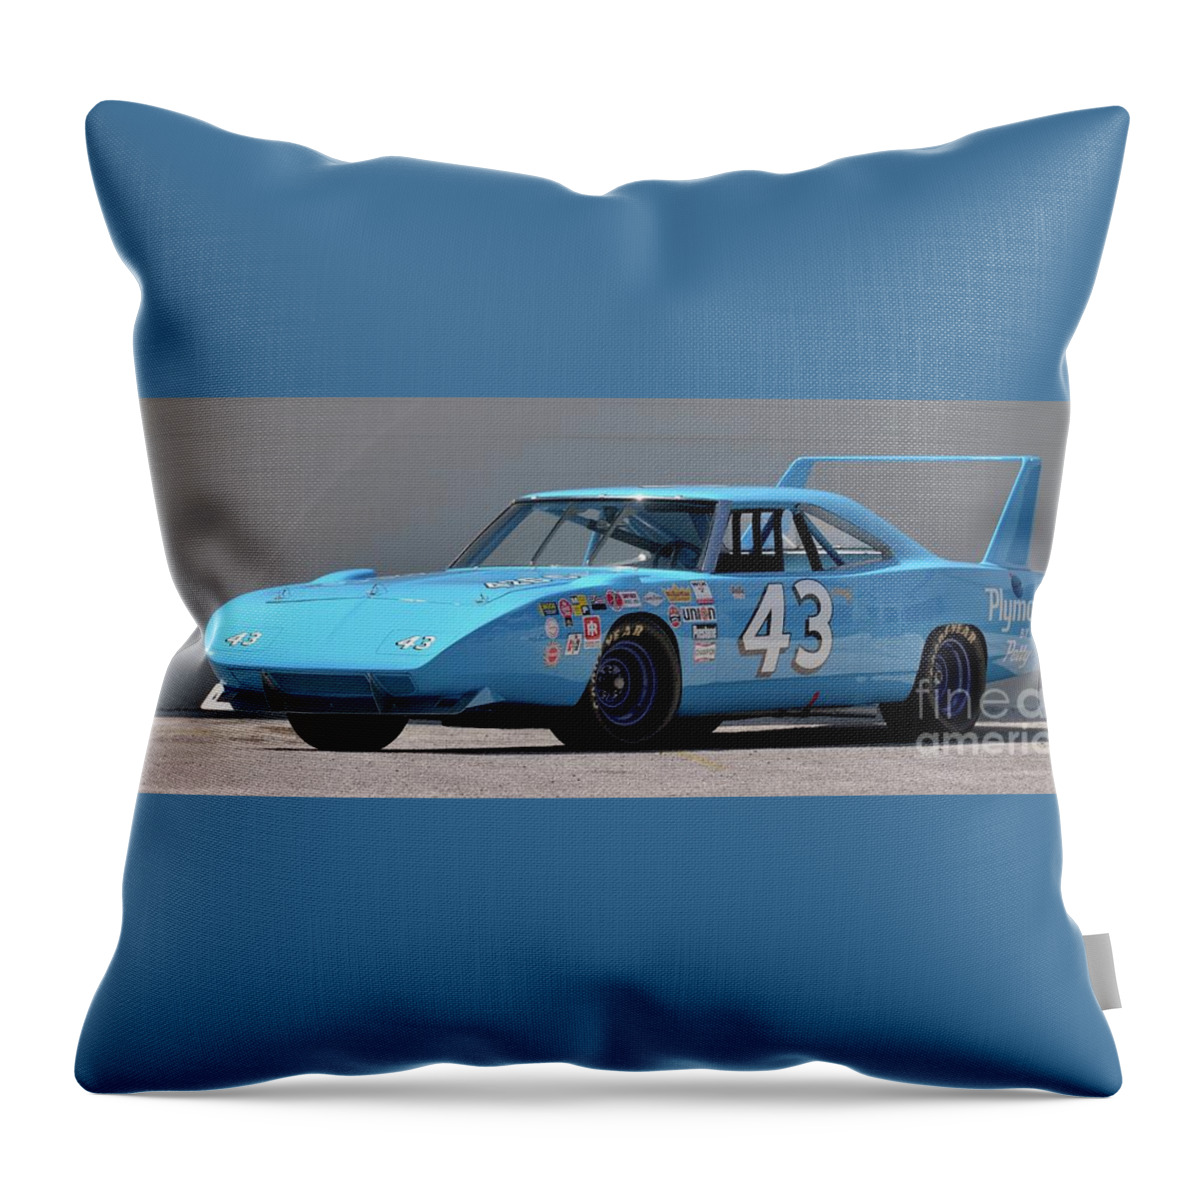 Petty Throw Pillow featuring the photograph Petty by Action